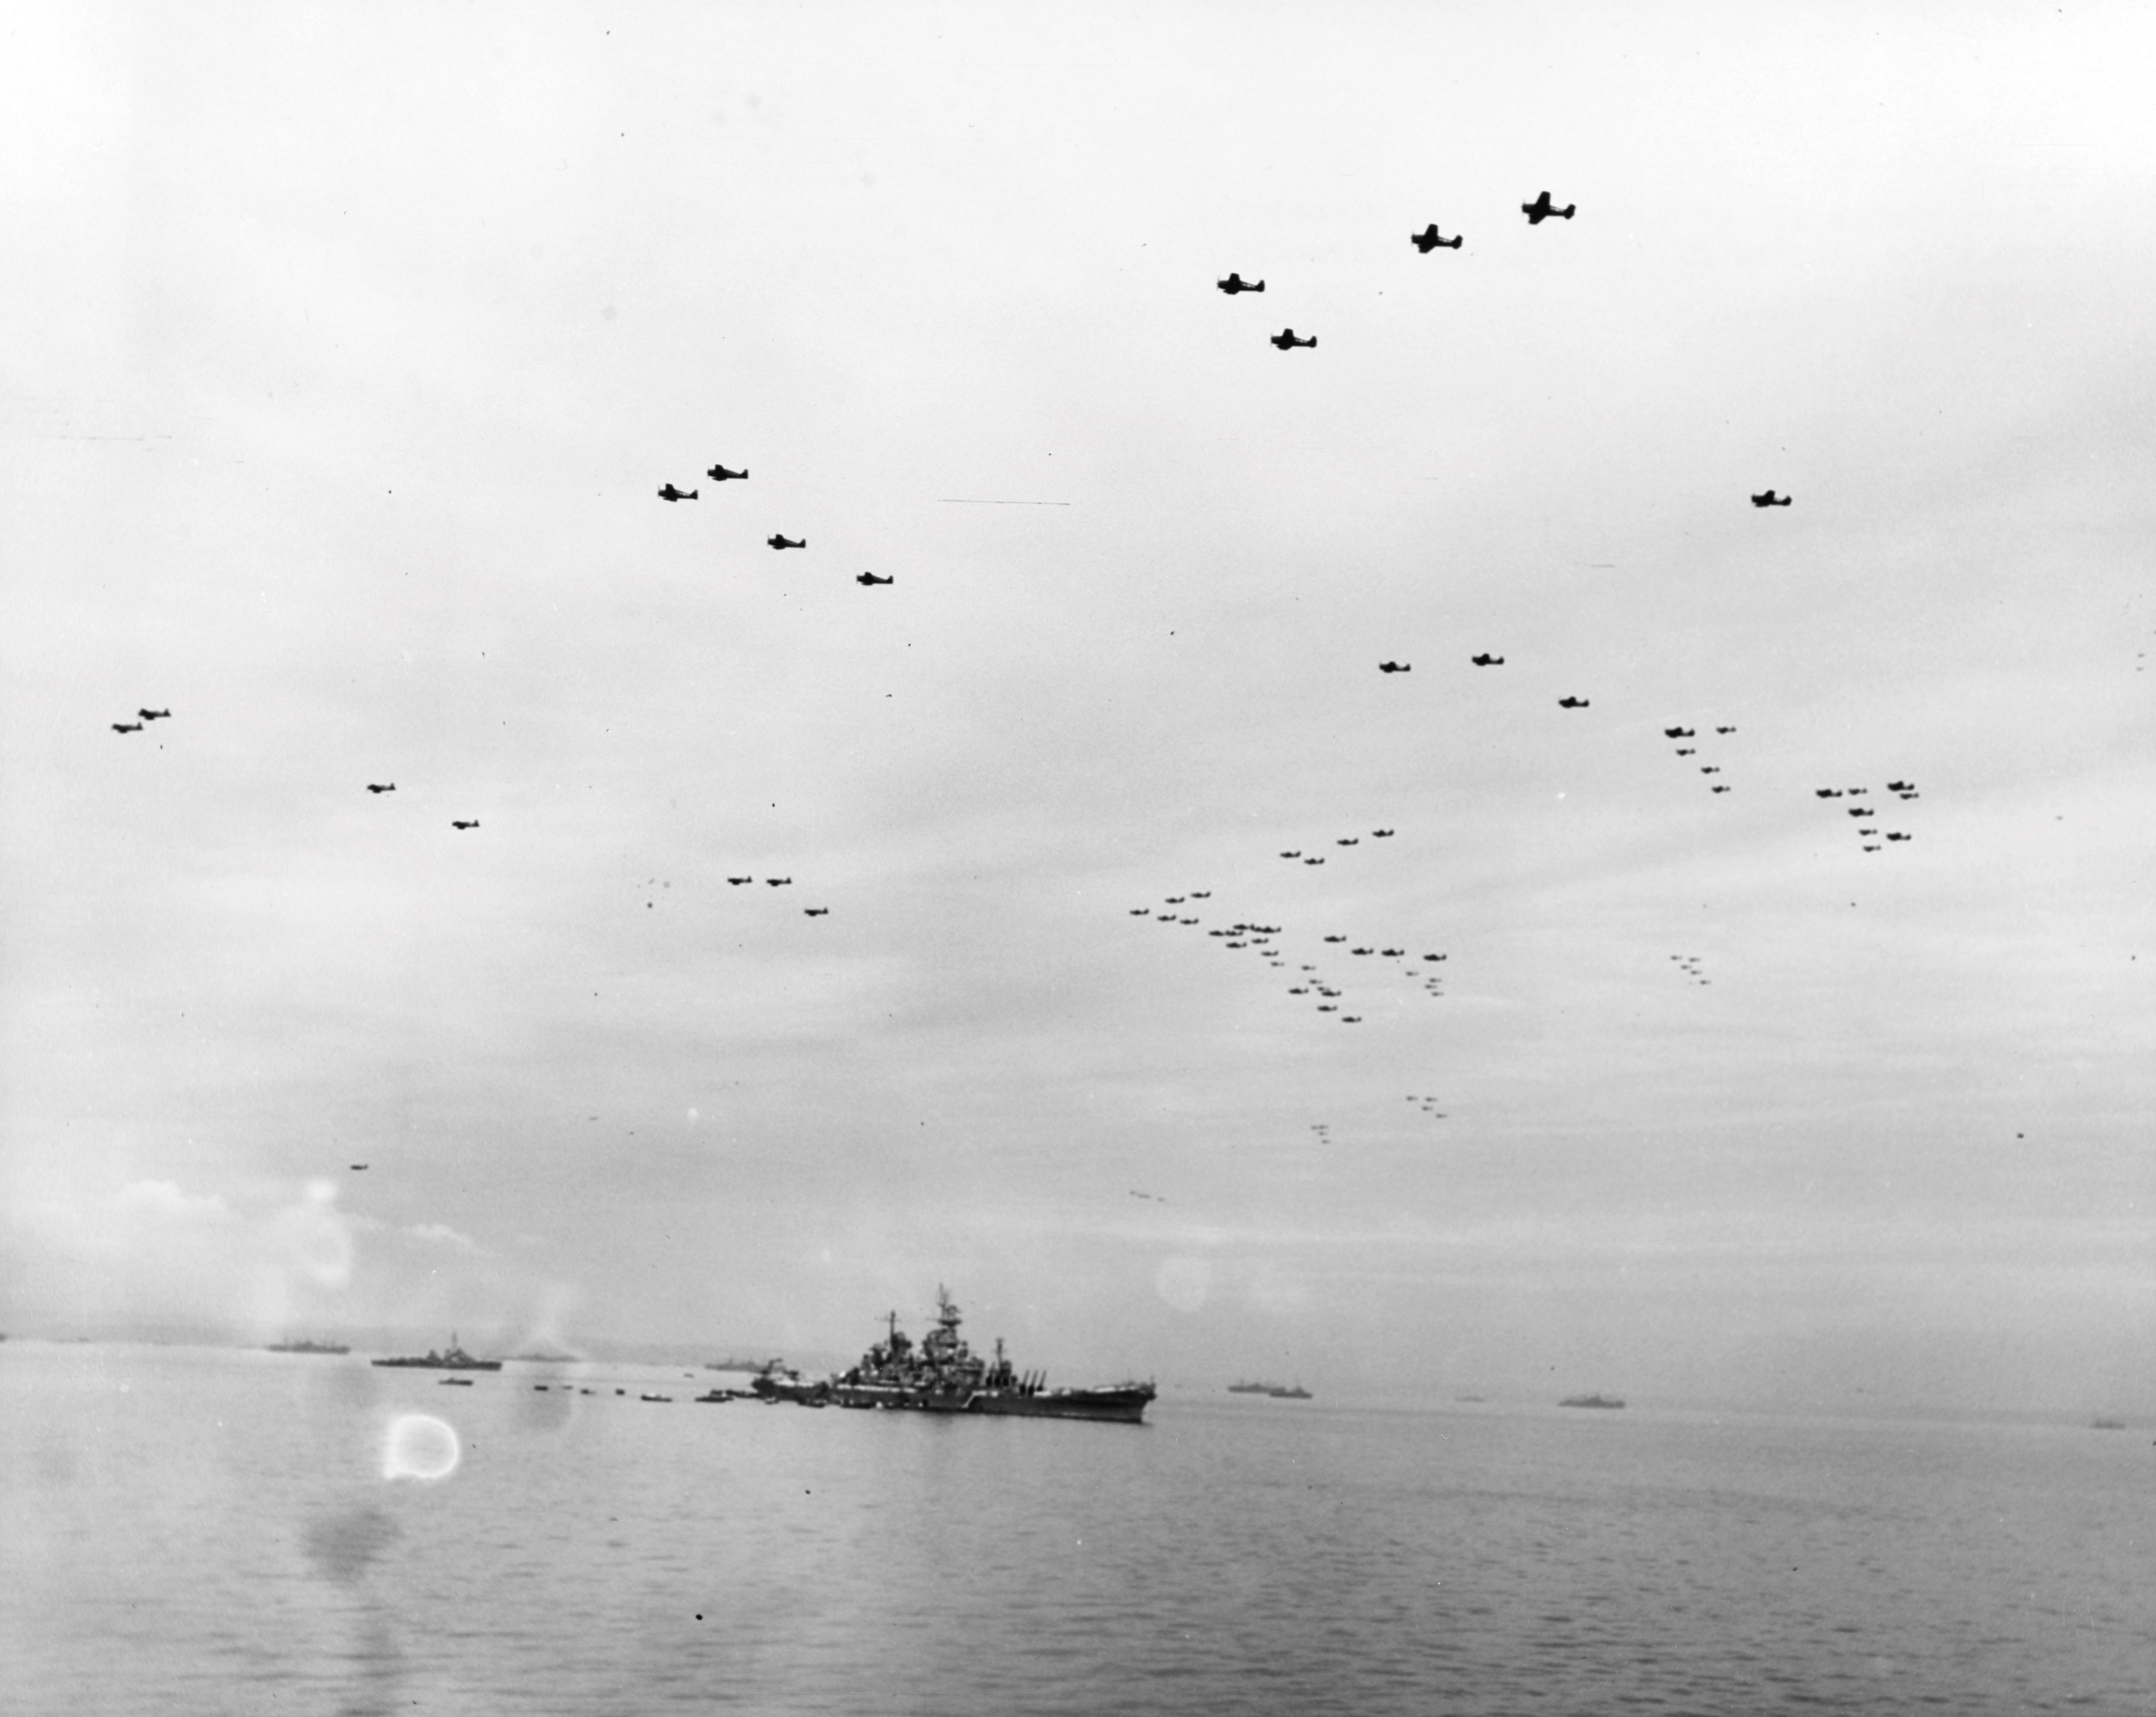 American aircraft fly over USS Missouri after the surrender, photo 3 of 3